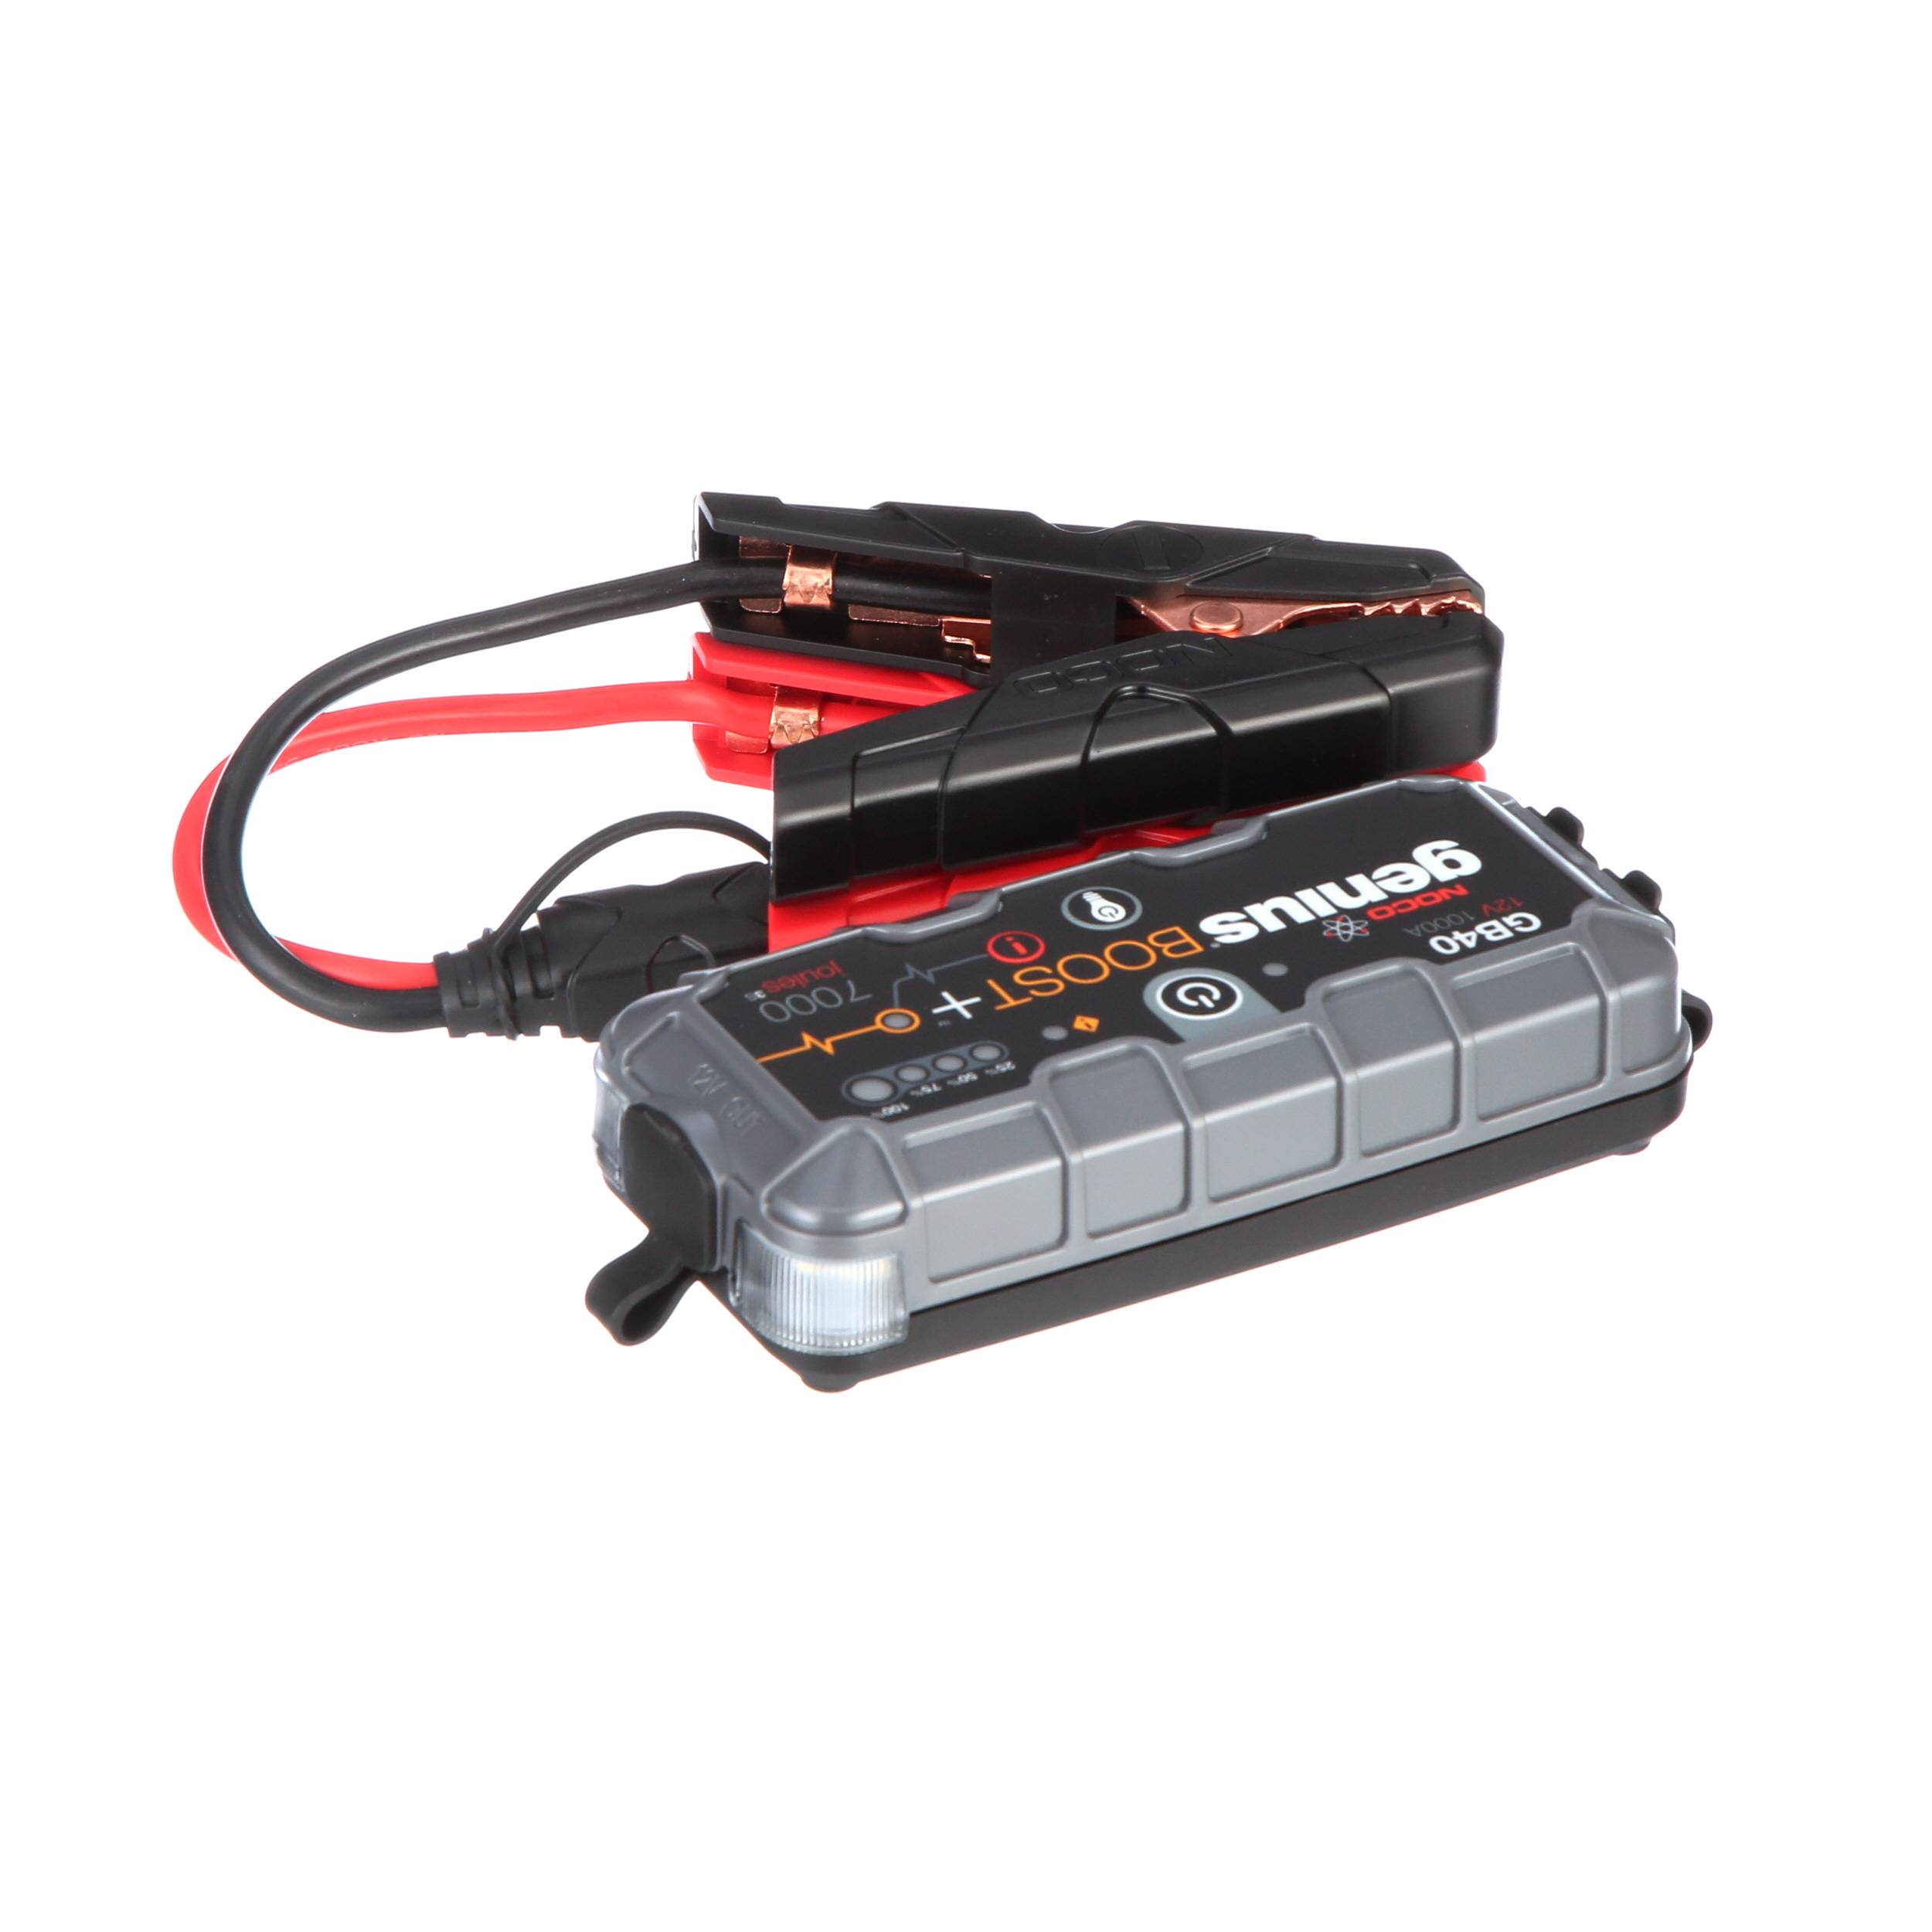 GMC GB40 Boost Plus 1,000-Amp Battery Jump Starter by NOCO® - Associated  Accessories, 19366935